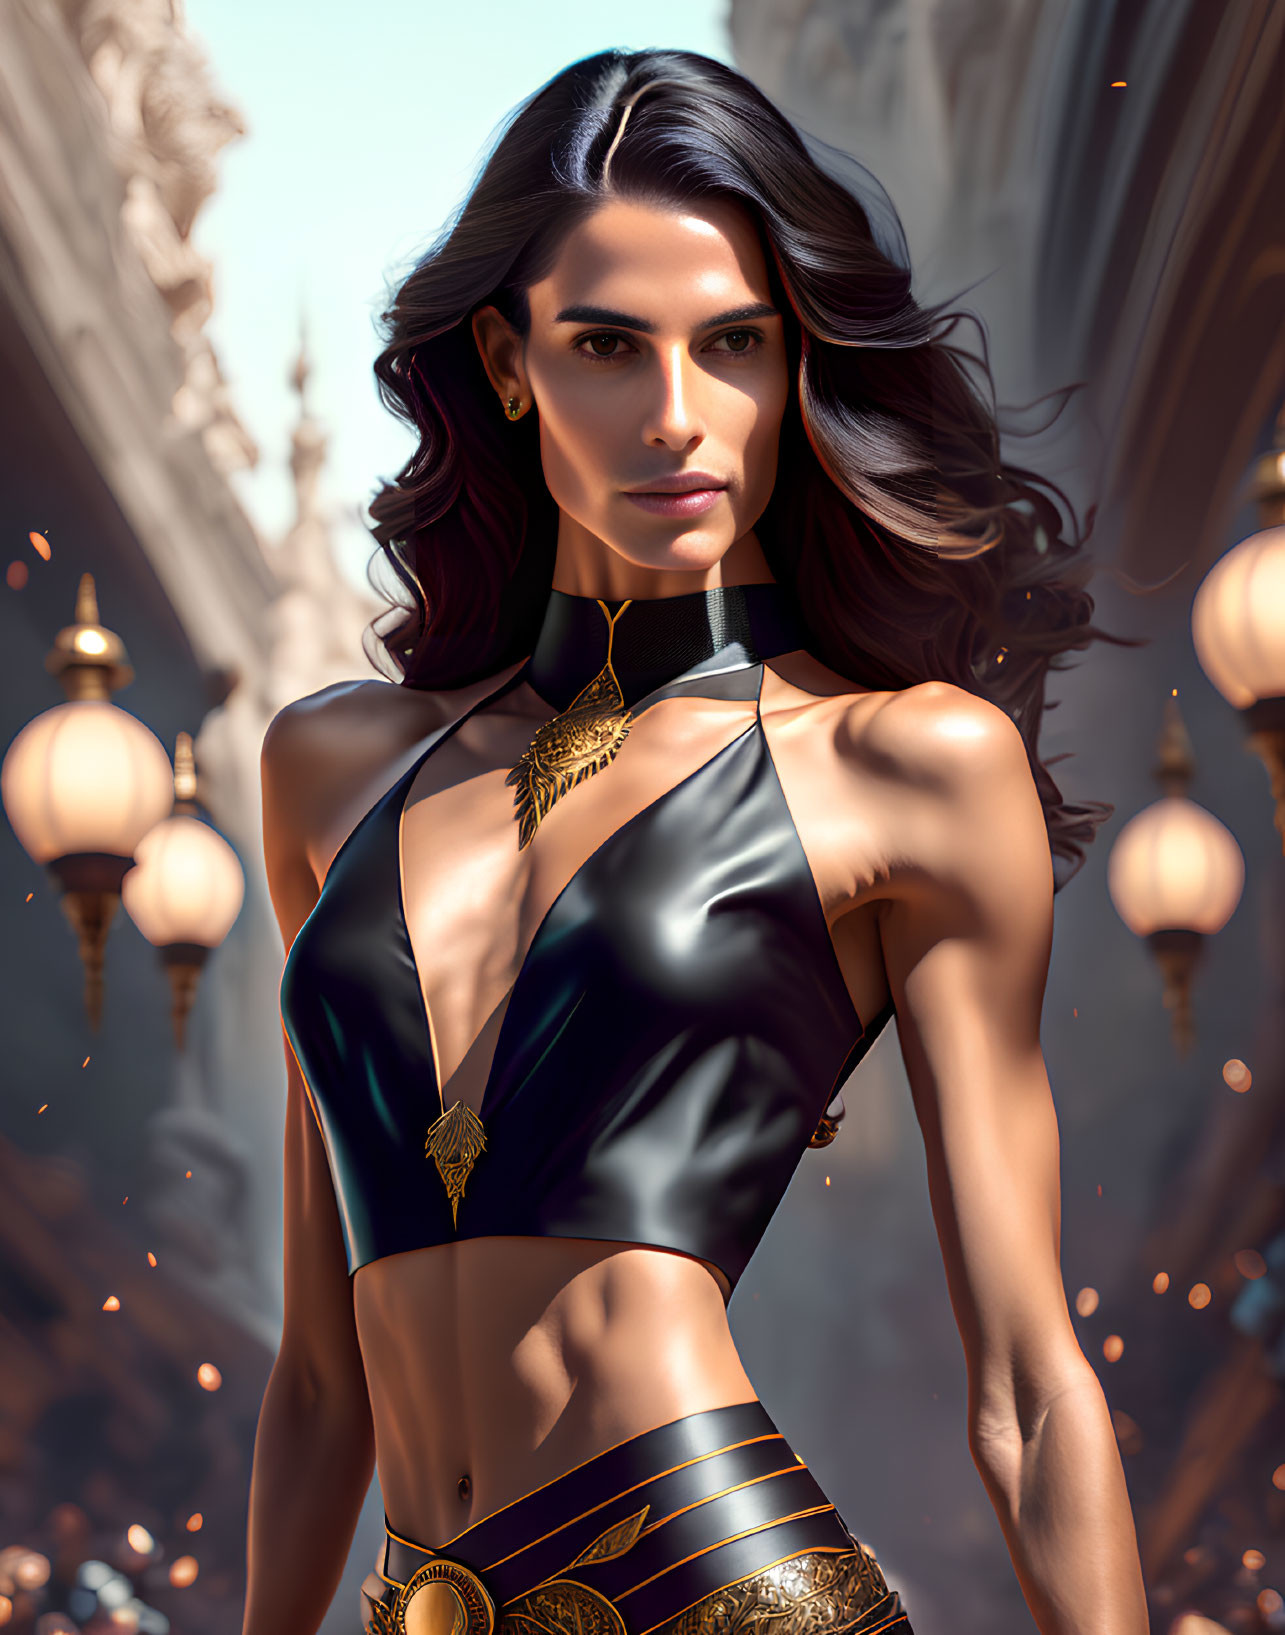 Long-haired woman in black and gold halter top in Arabian fantasy scene